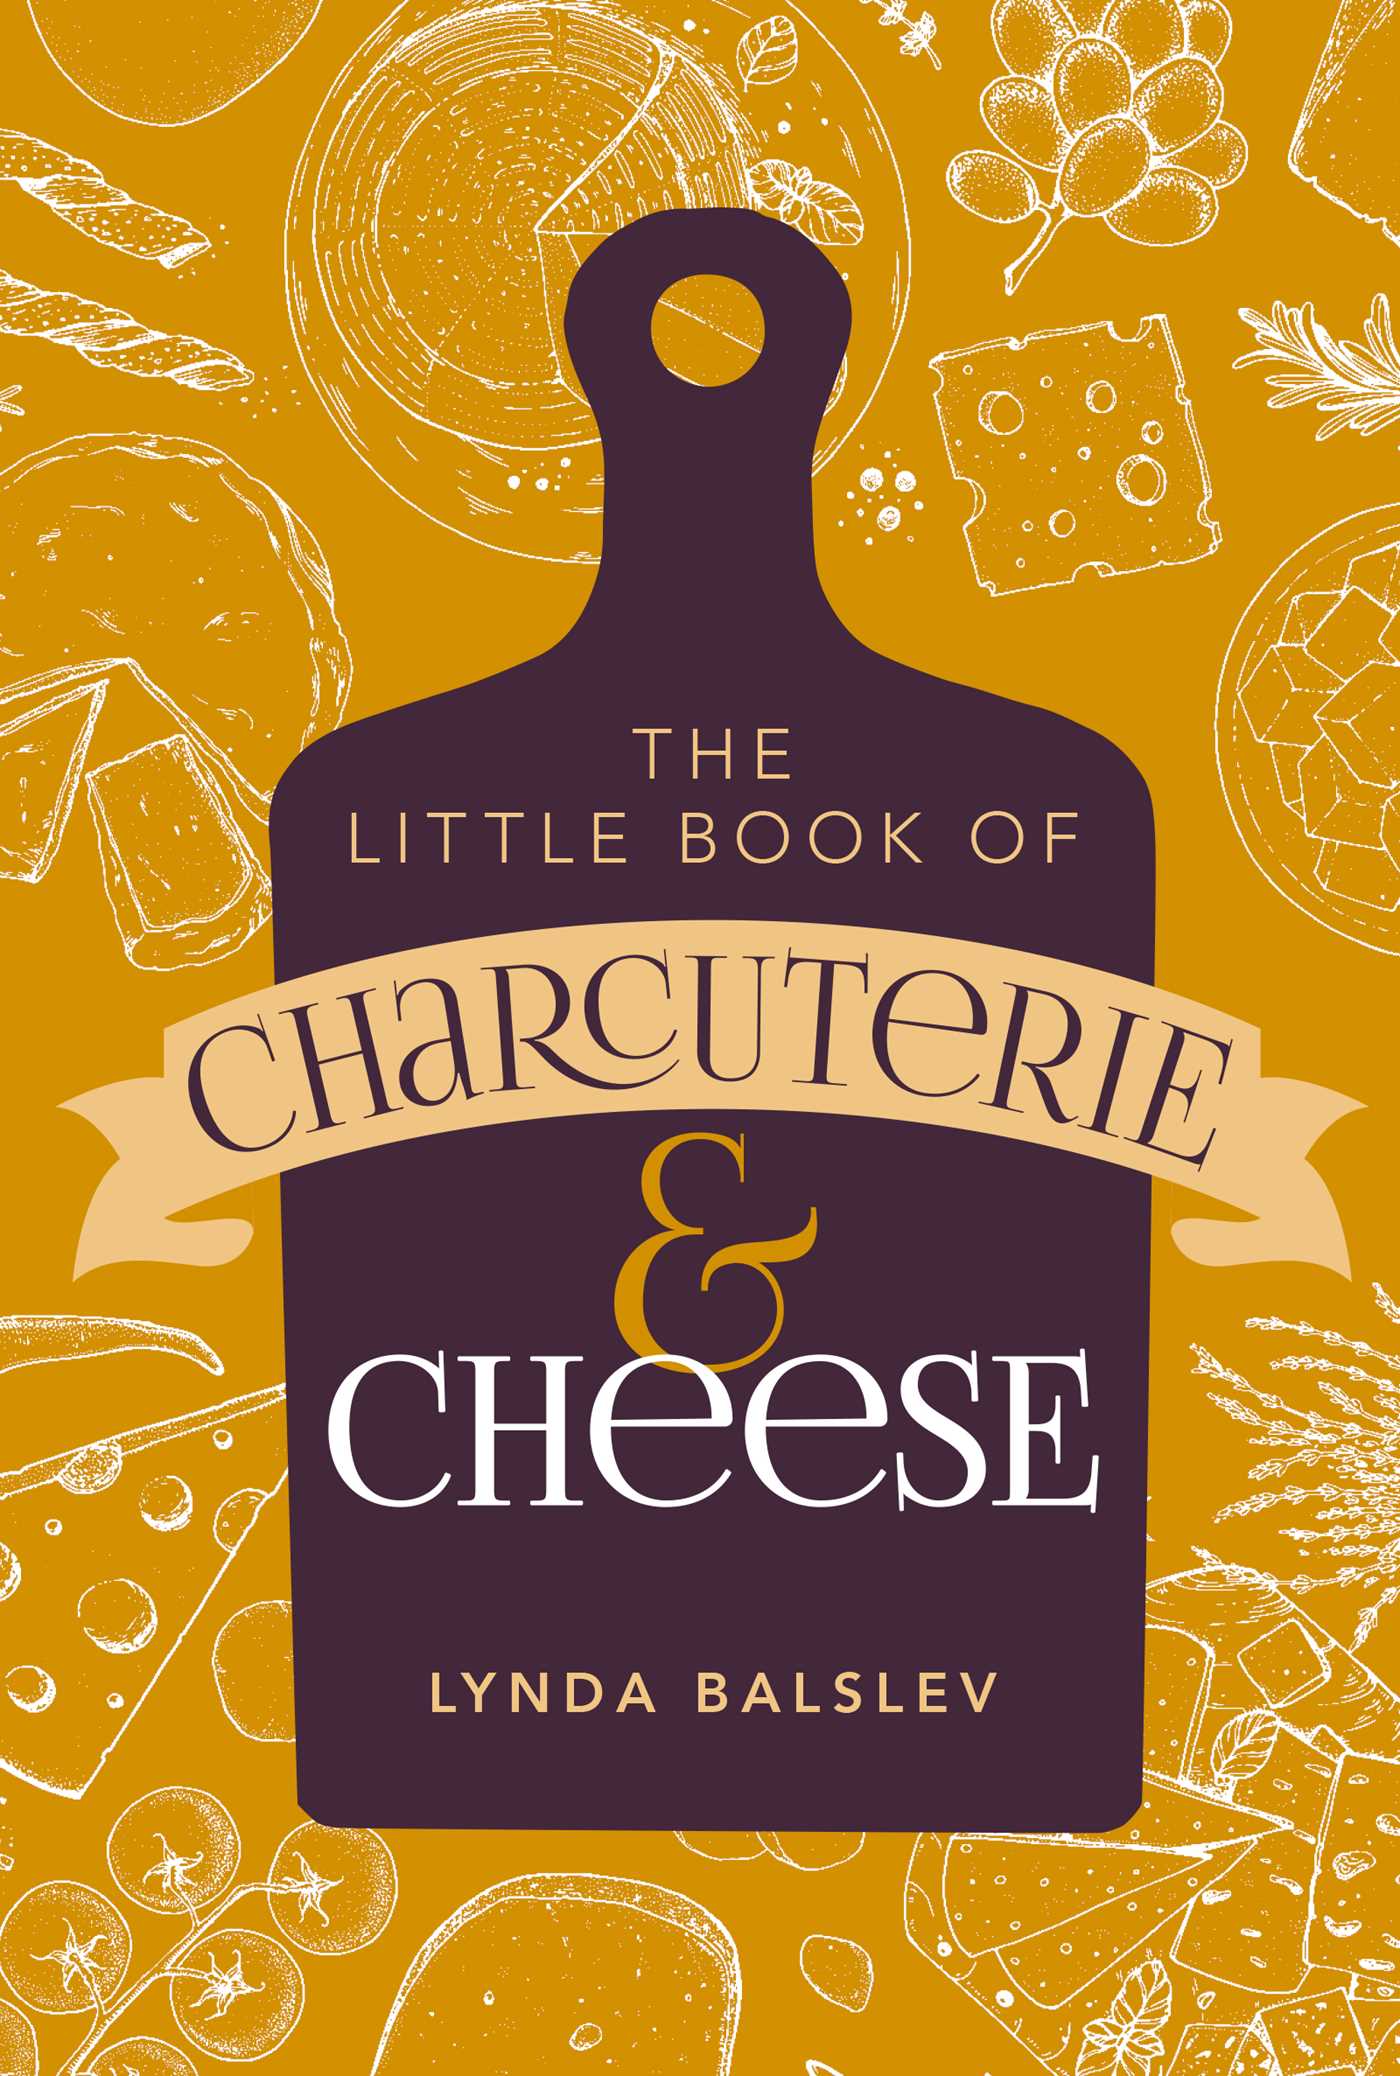 Little Book of Charcuterie and Cheese | Balslev, Lynda